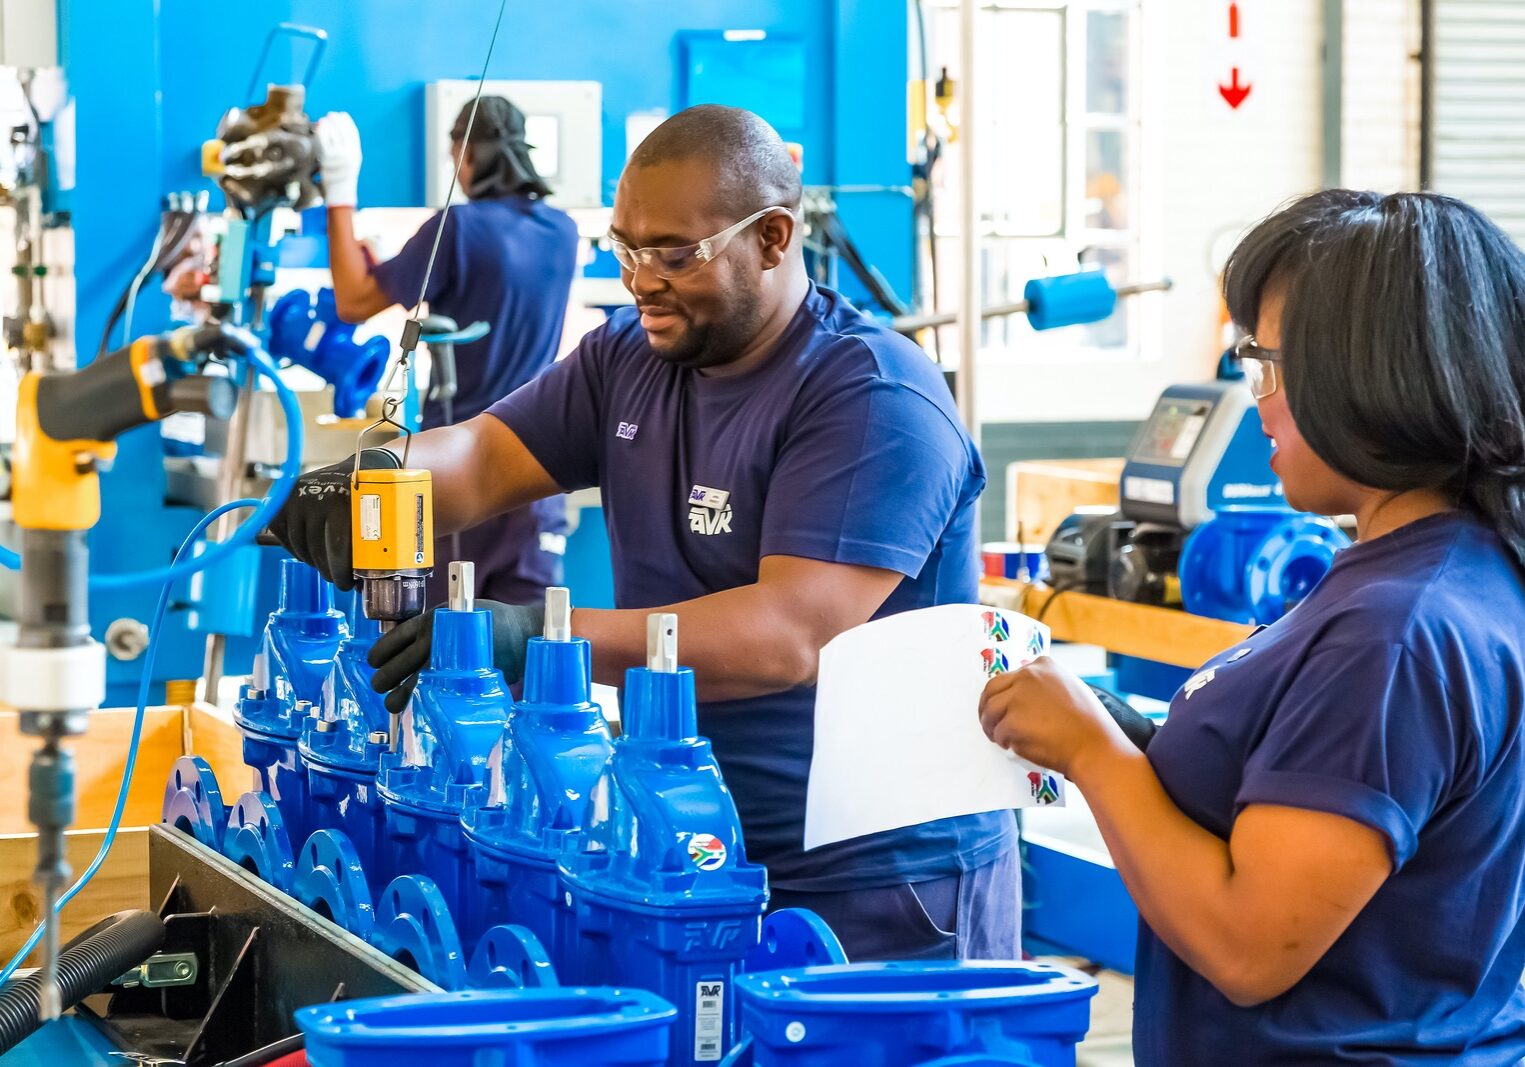 A man and woman working on blue bottles.